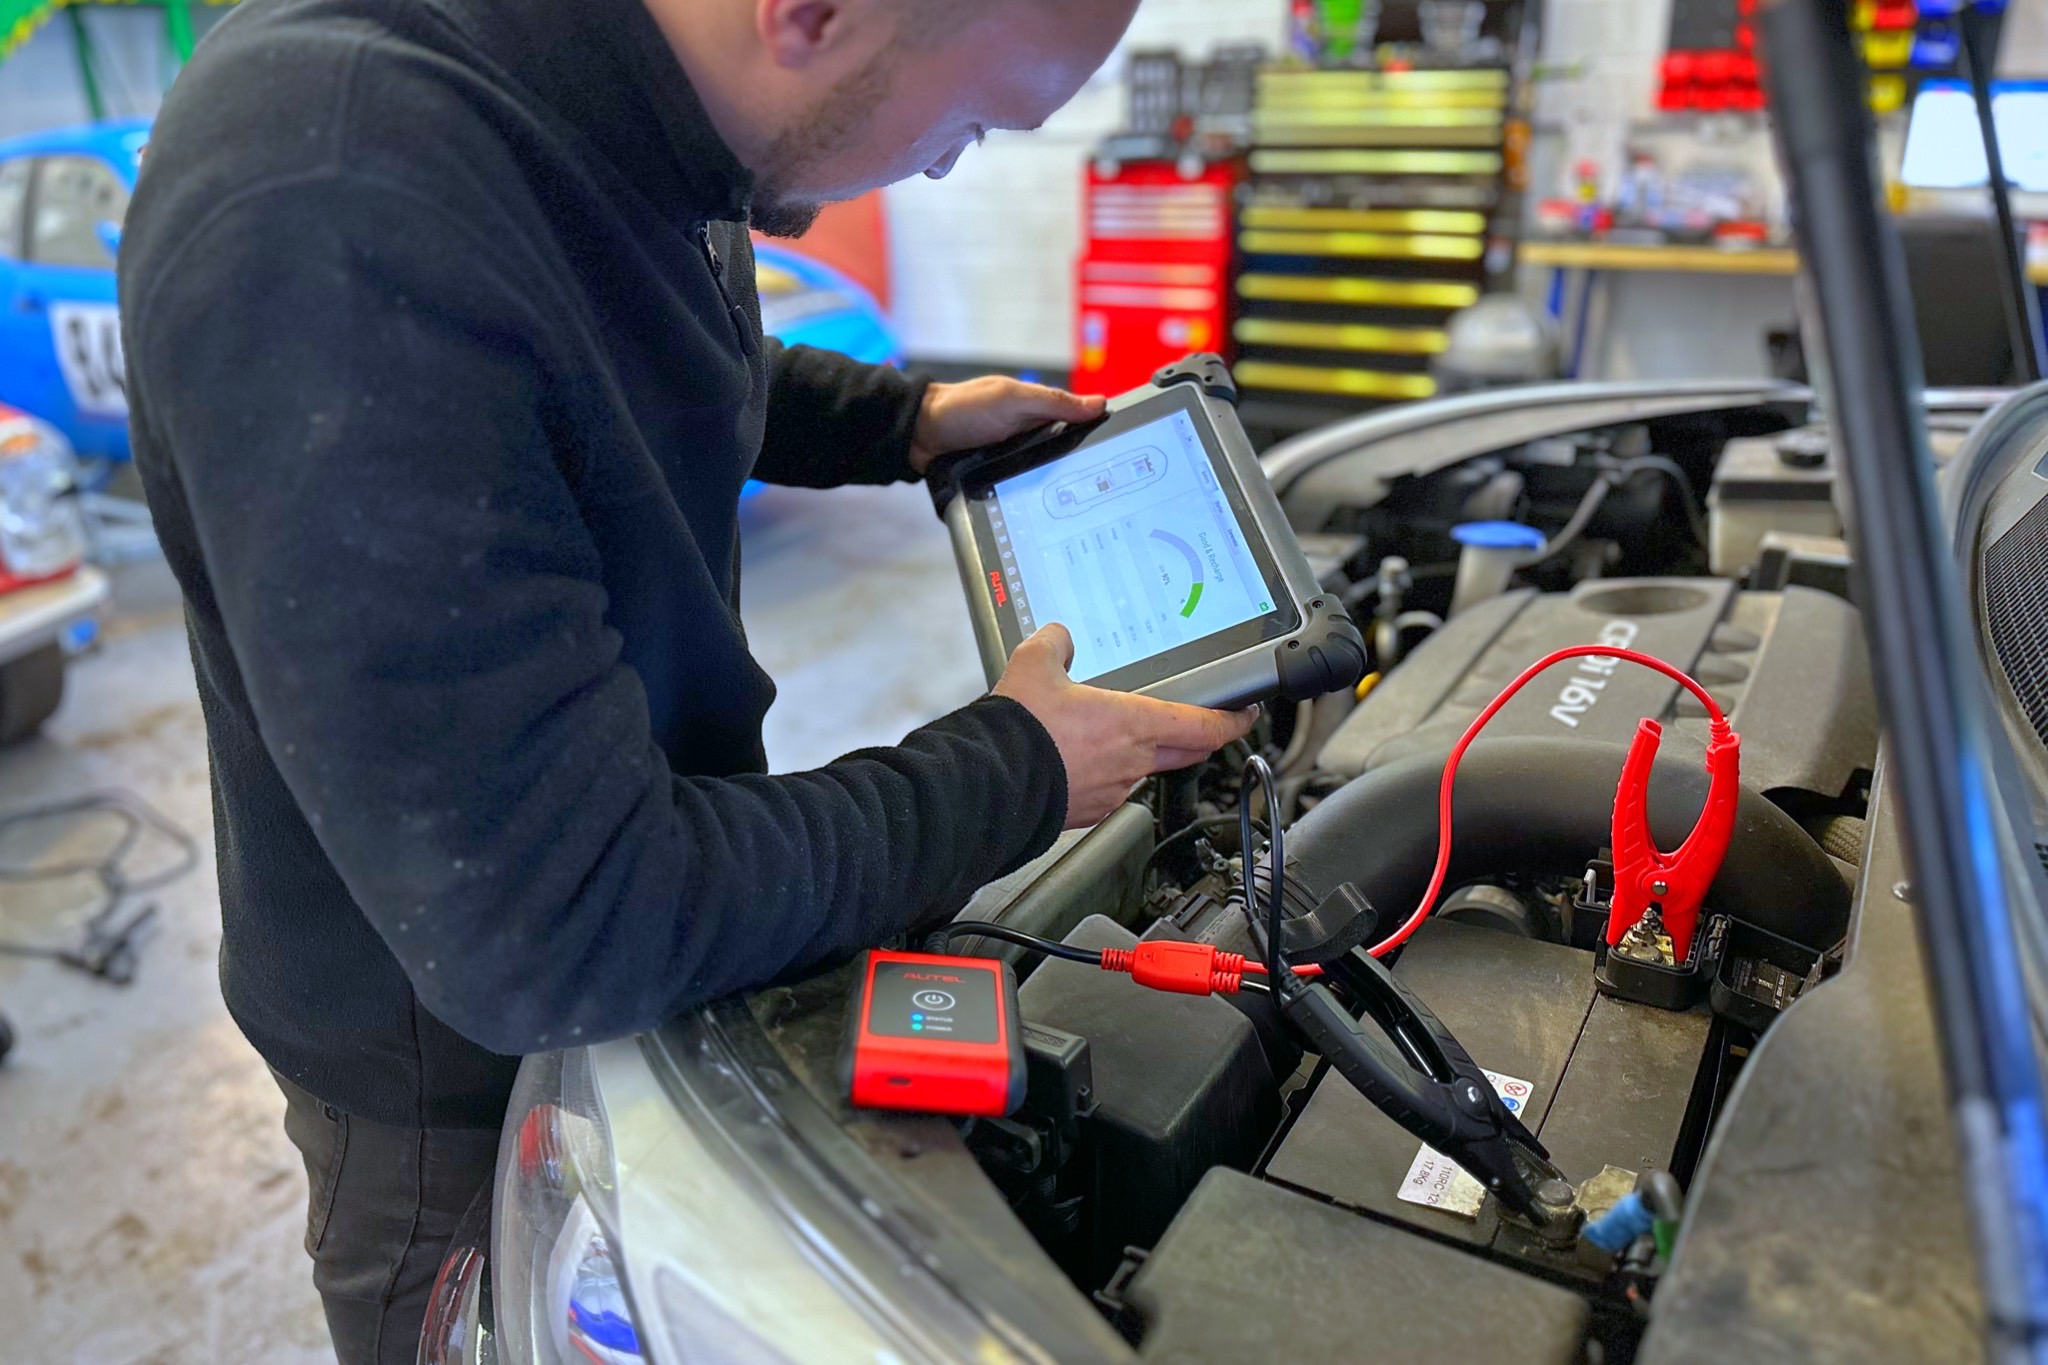 A mechanic in a black fleece is conducting a diagnostic test on a vehicle at a garage North Walsham. The technician is focused on a handheld diagnostic tool displaying vehicle stats. The car battery has red and black jumper cables attached, and the environment suggests an in-depth servicing session. Tools and equipment are visible in the background, indicating a professional automotive workshop setting.